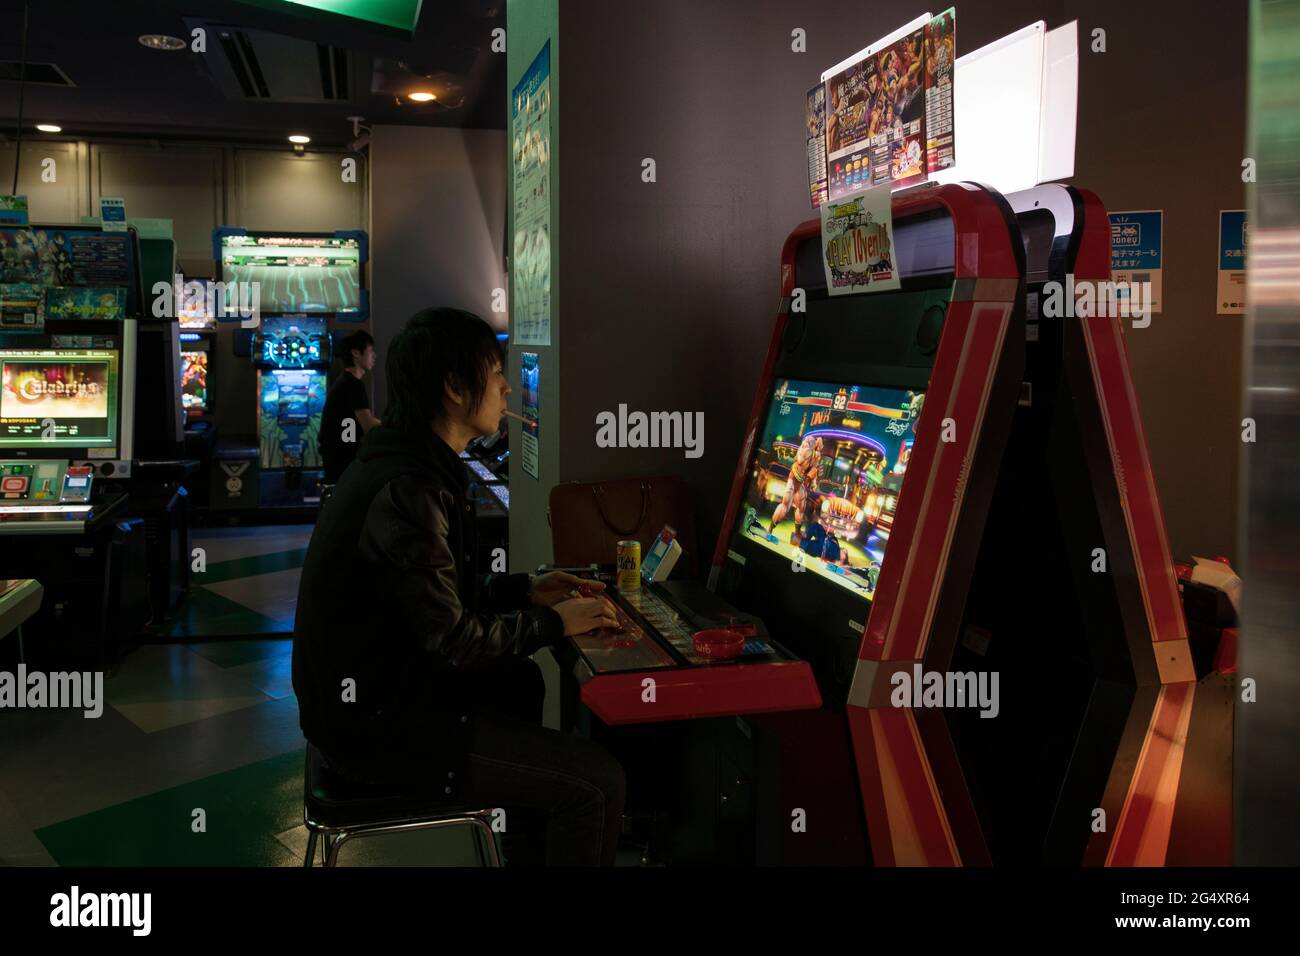 A person smoking while playing videogames in a Japanese arcade Stock Photo